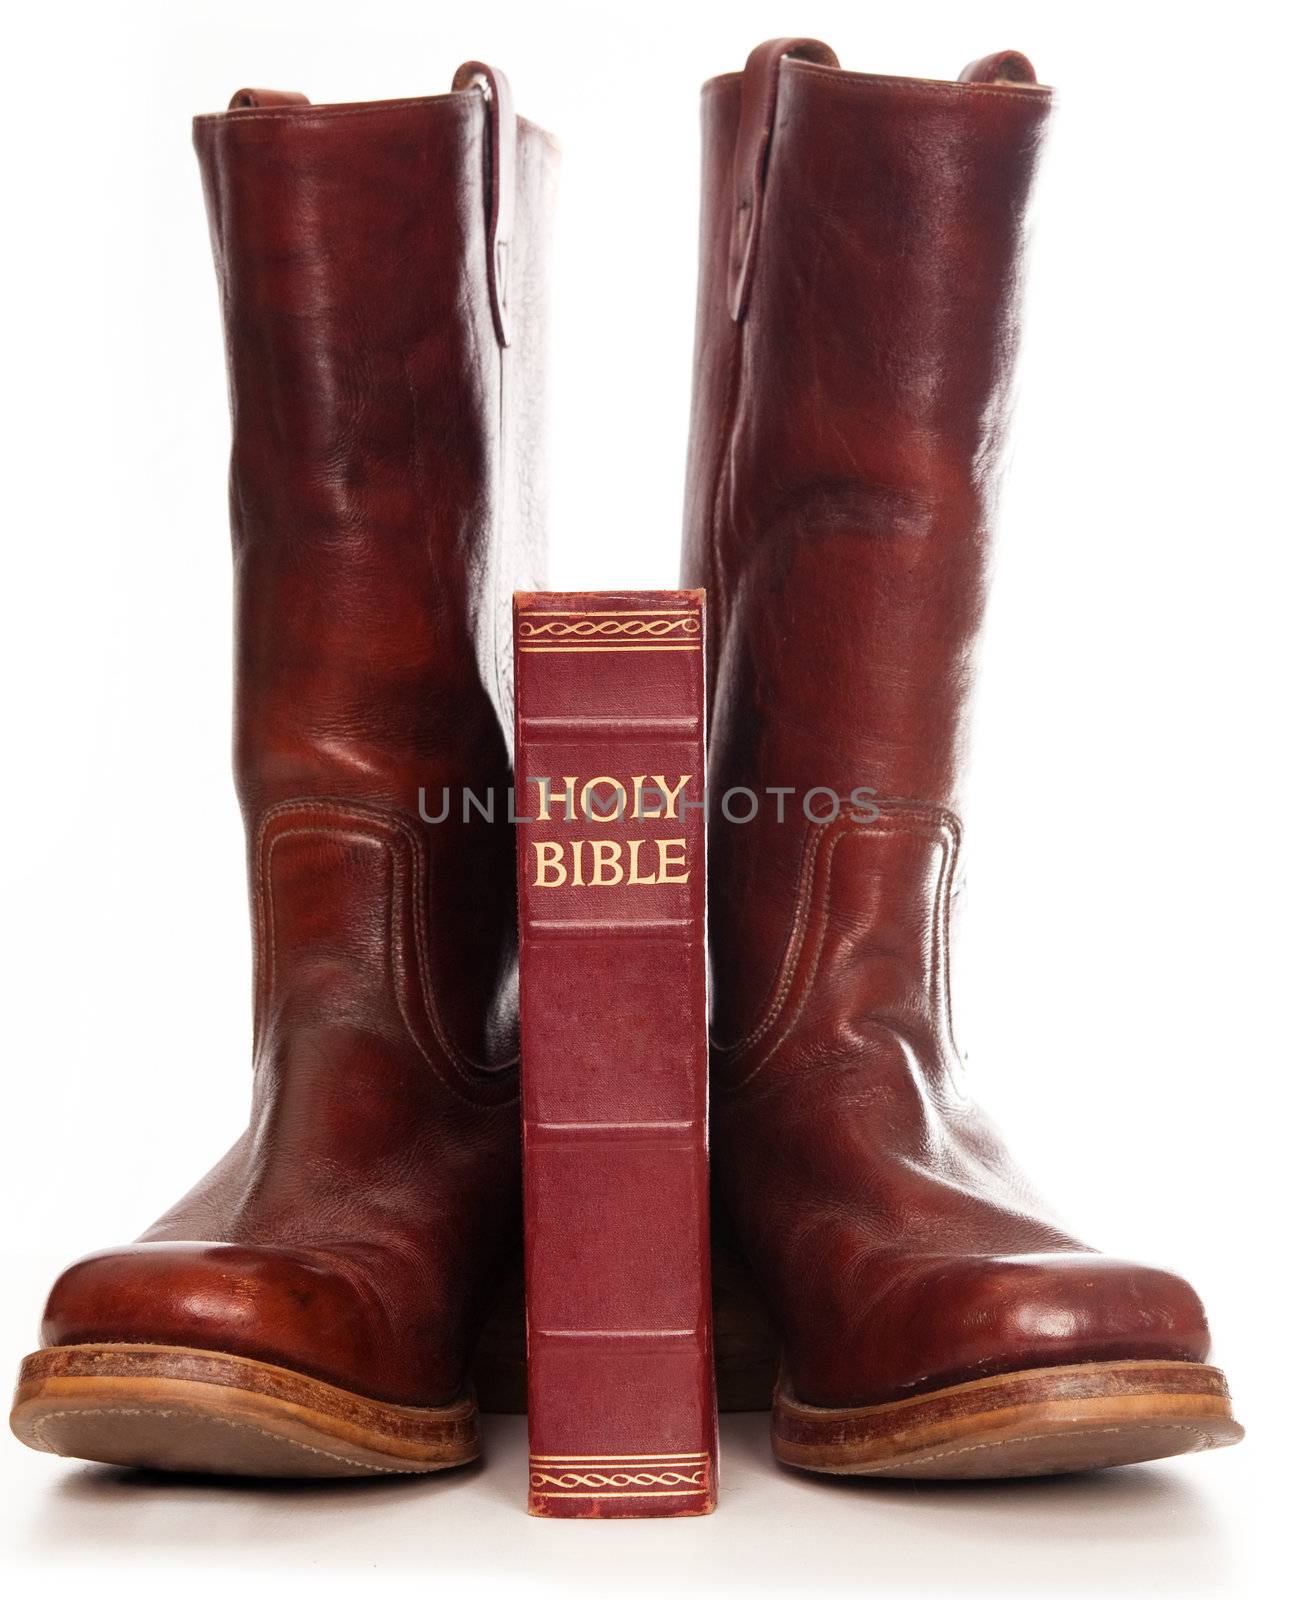 Boots and the bible against white background  by Paulmatthewphoto